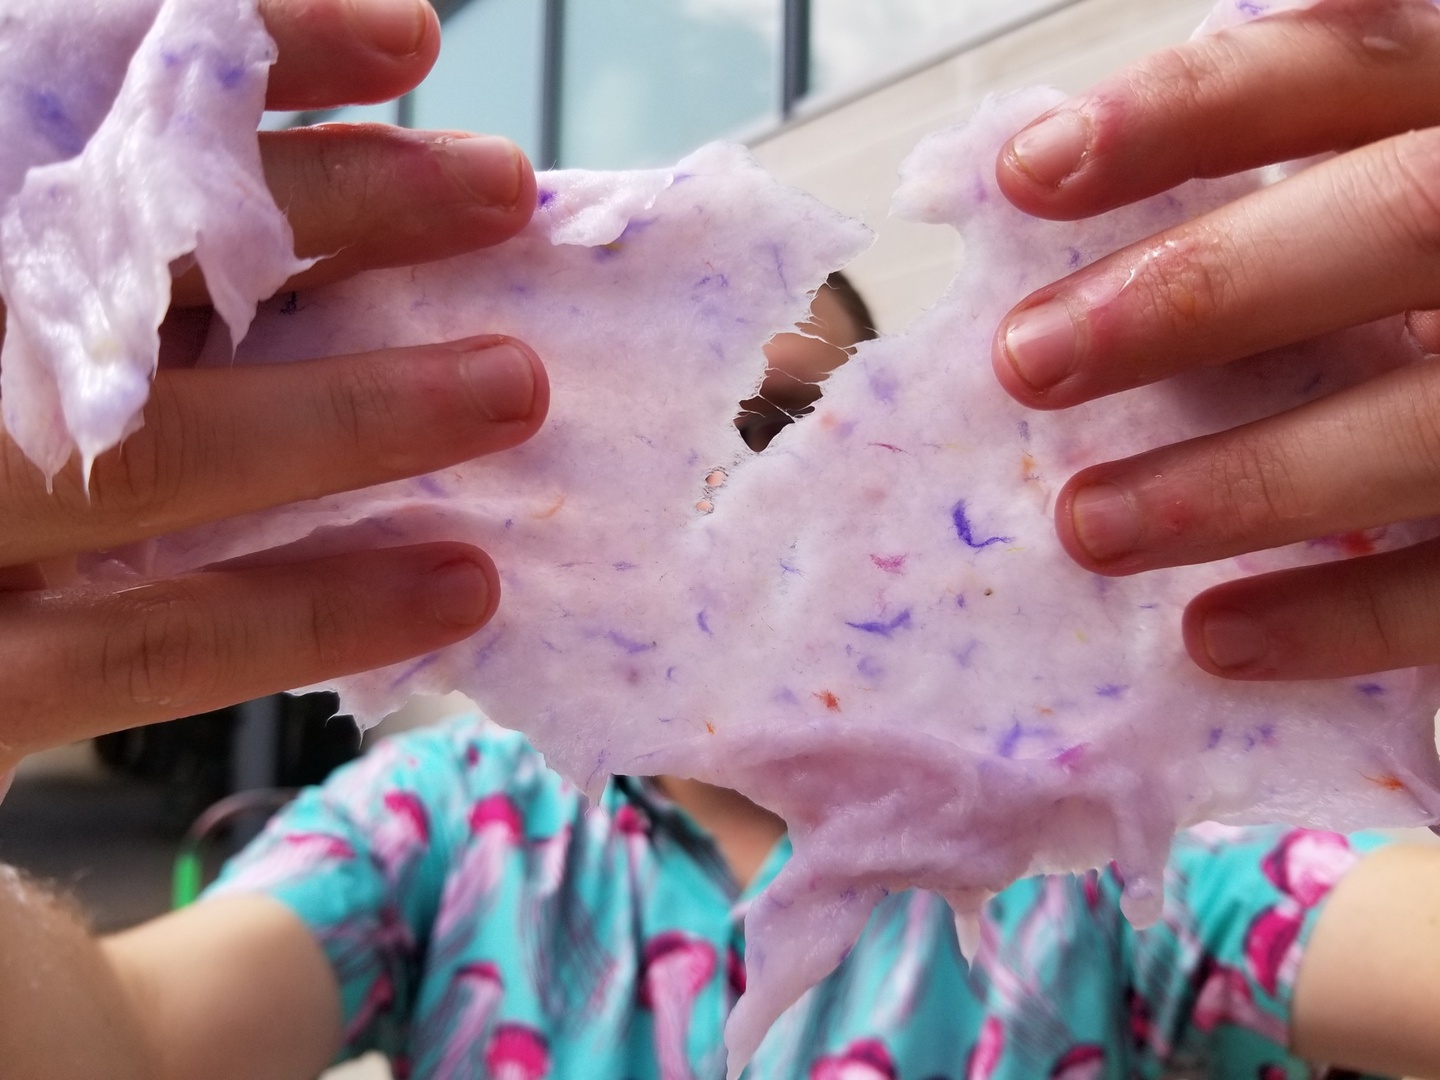 Hands pulling apart gooey pink, stretch paper pulp.